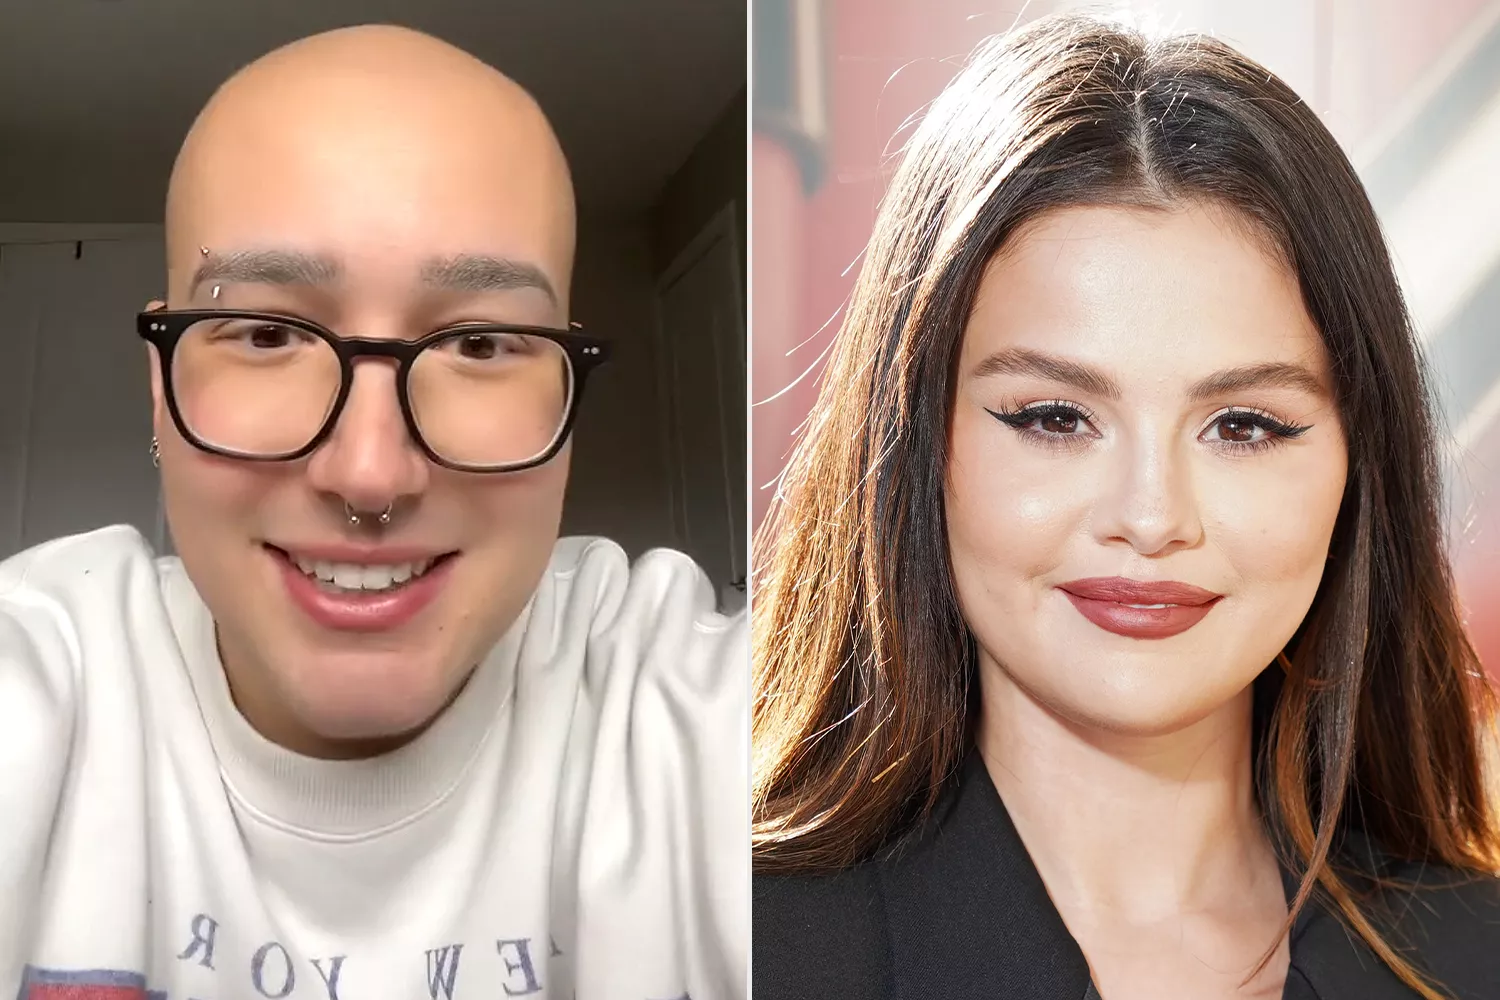 Selena Gomez Shares Video from Cancer Patient After He Posts Heâs Her âNo. 1 Fanâ